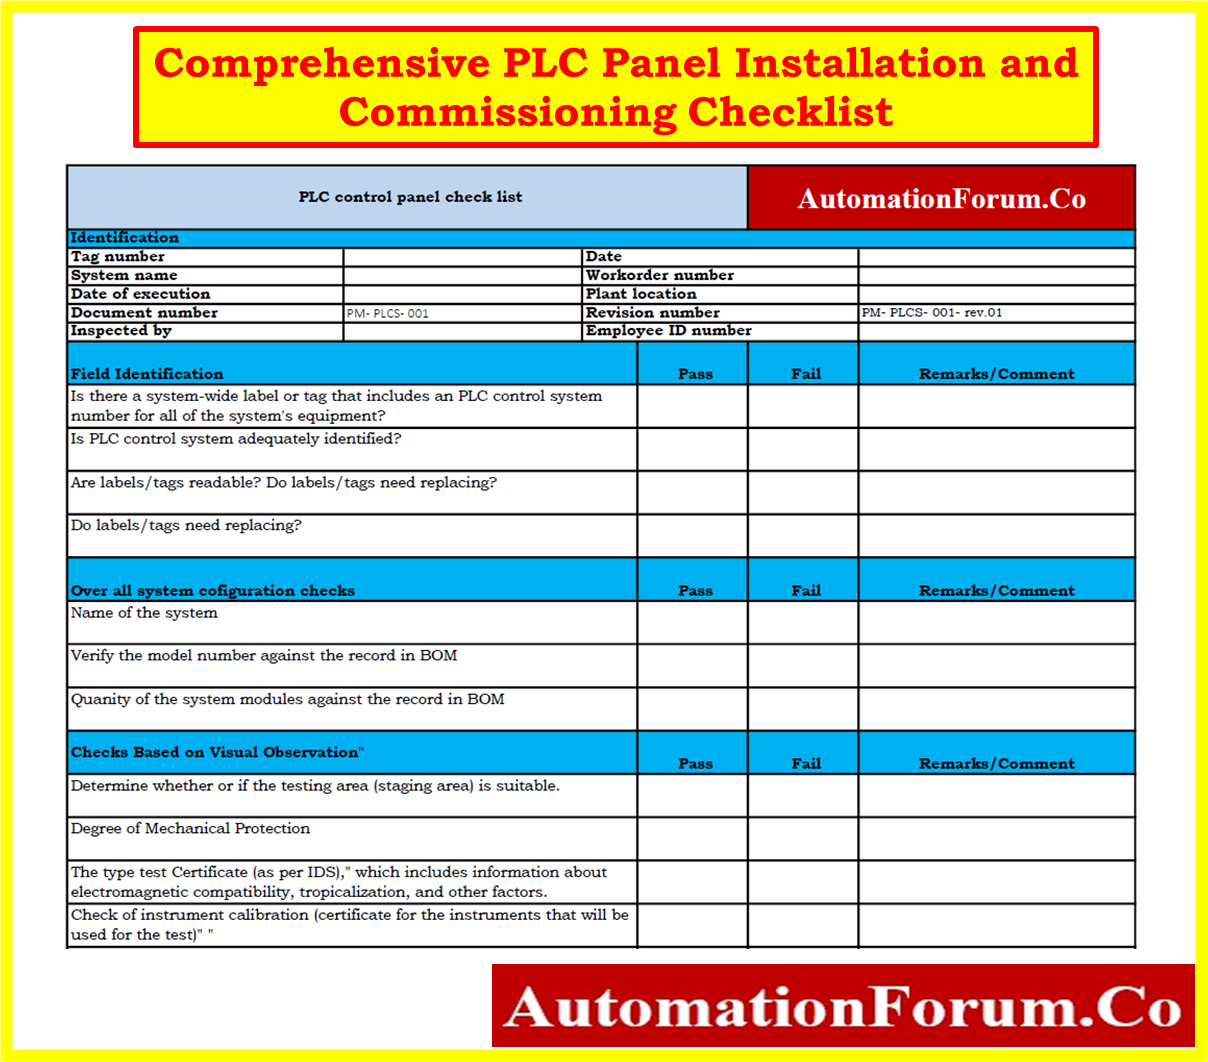 Comprehensive PLC Panel Installation and Commissioning Checklist (Downloadable)